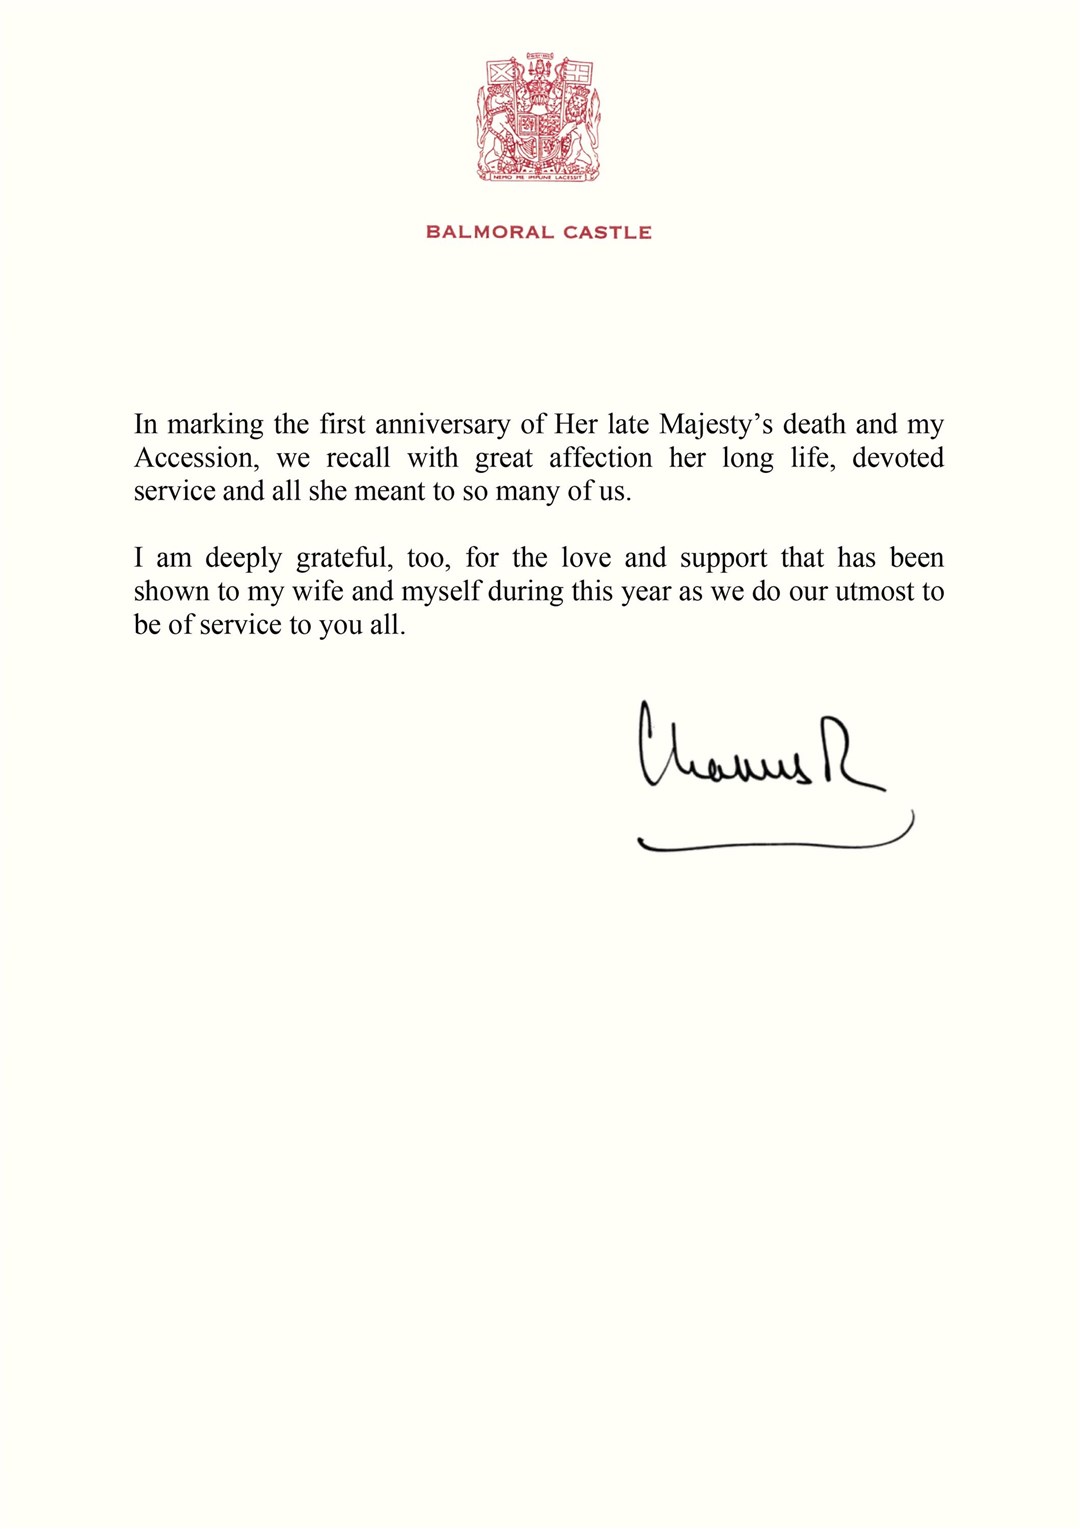 The King’s message on his accession day (His Majesty King Charles III 2023/PA)